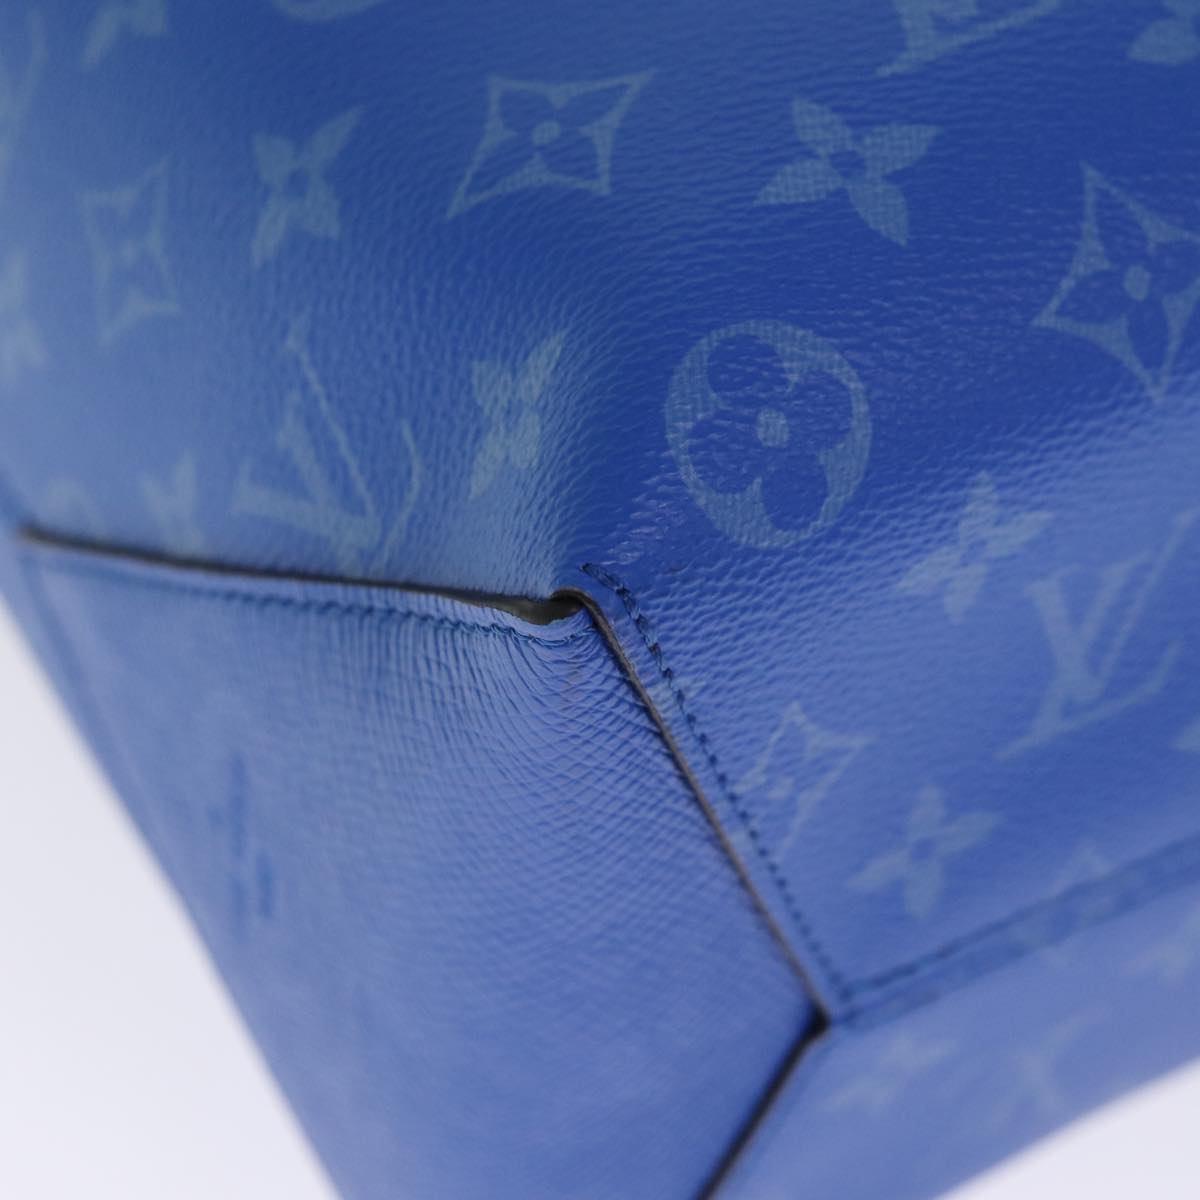 LOUIS VUITTON Taigalama Weekend Tote NM Tote Bag 2way Blue M31010 LV Auth 74022S